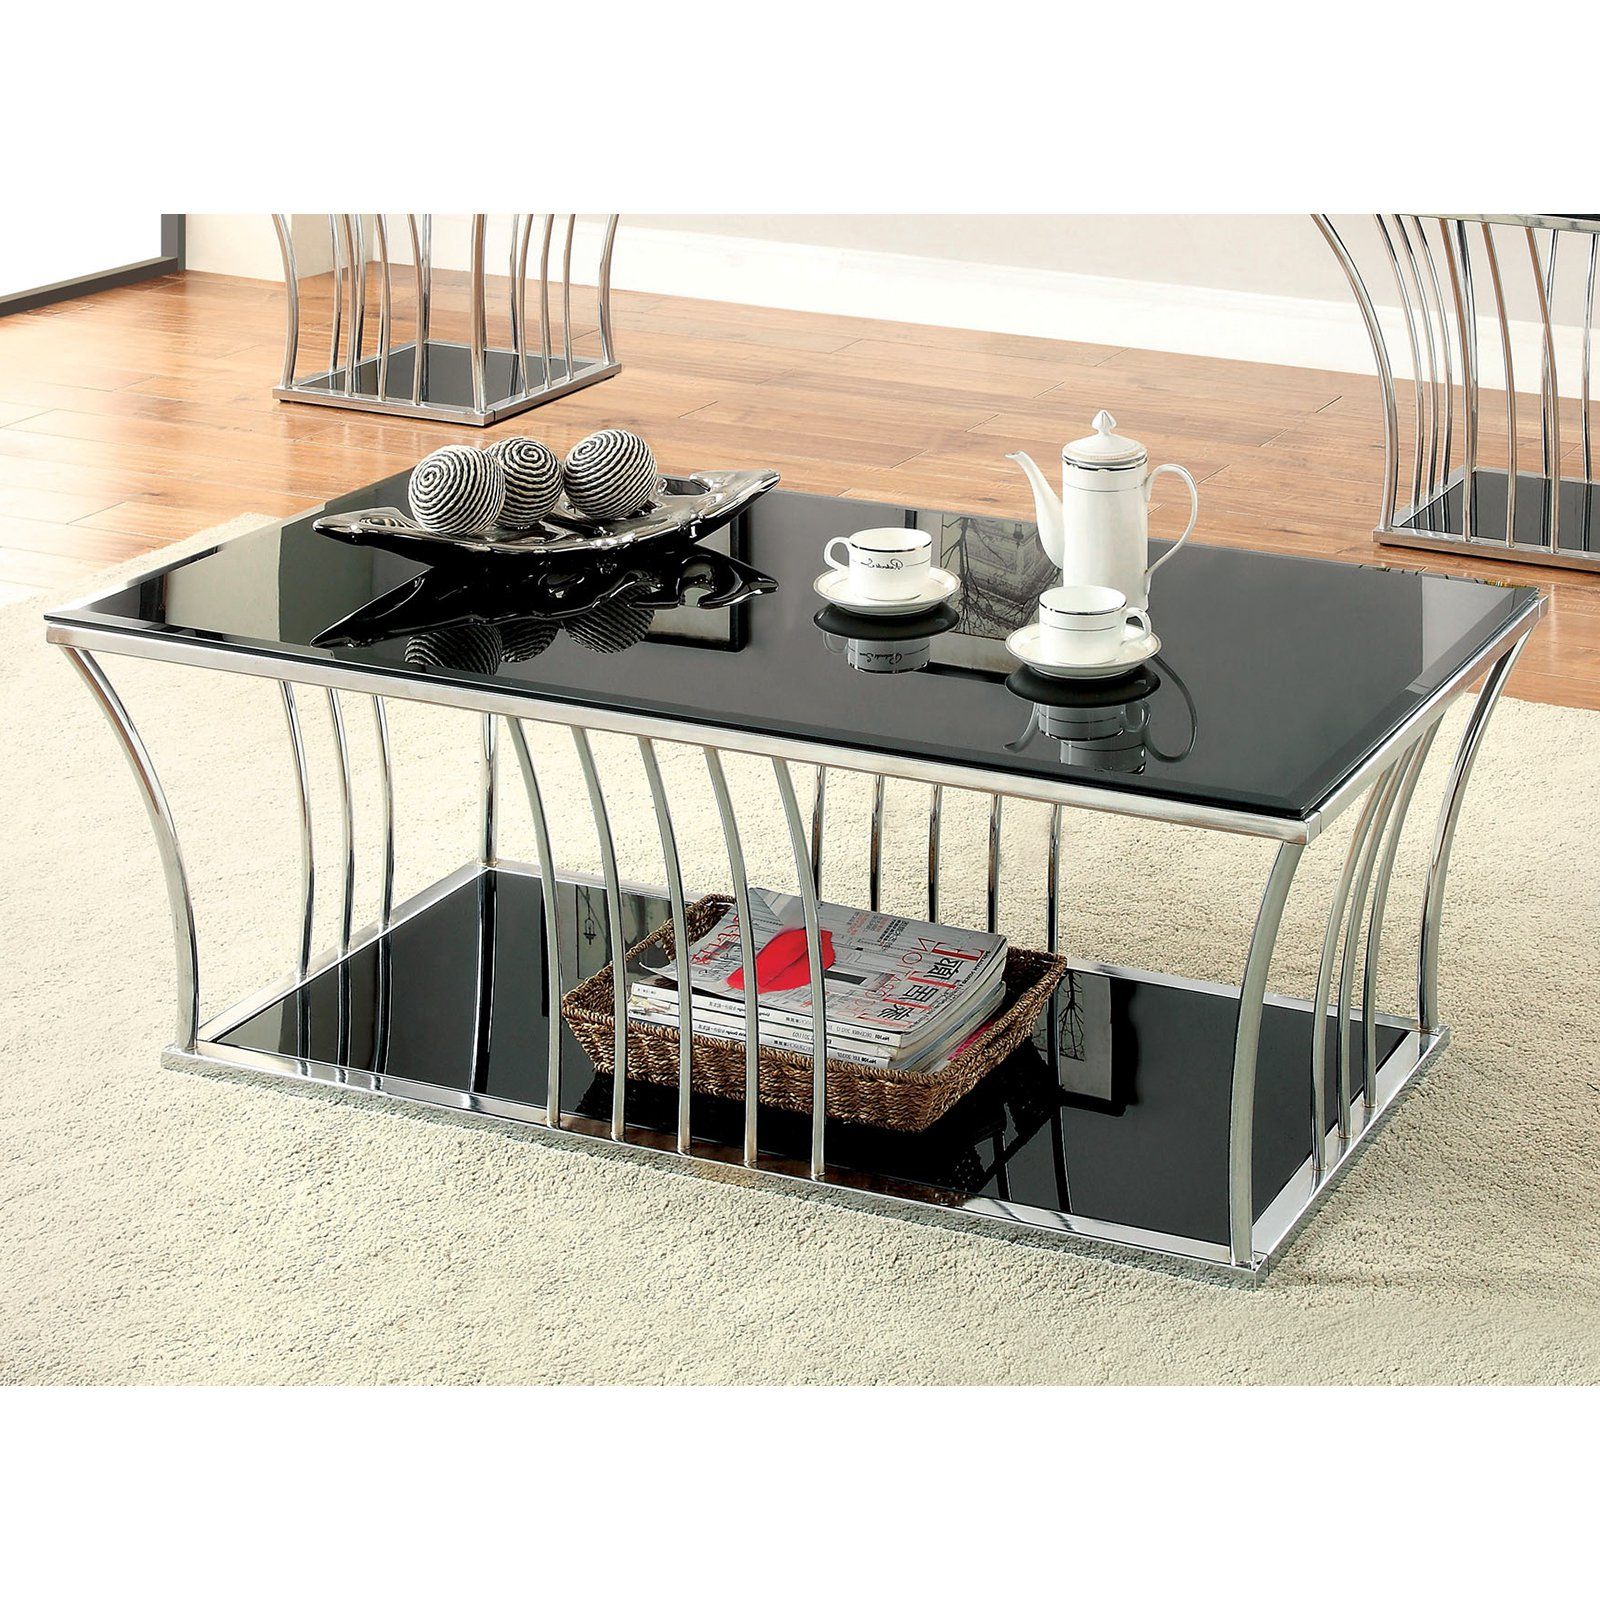 Furniture Of America Arsoli Beveled Glass Top Coffee Table – Chrome For Newest Black Coffee Tables (View 5 of 10)